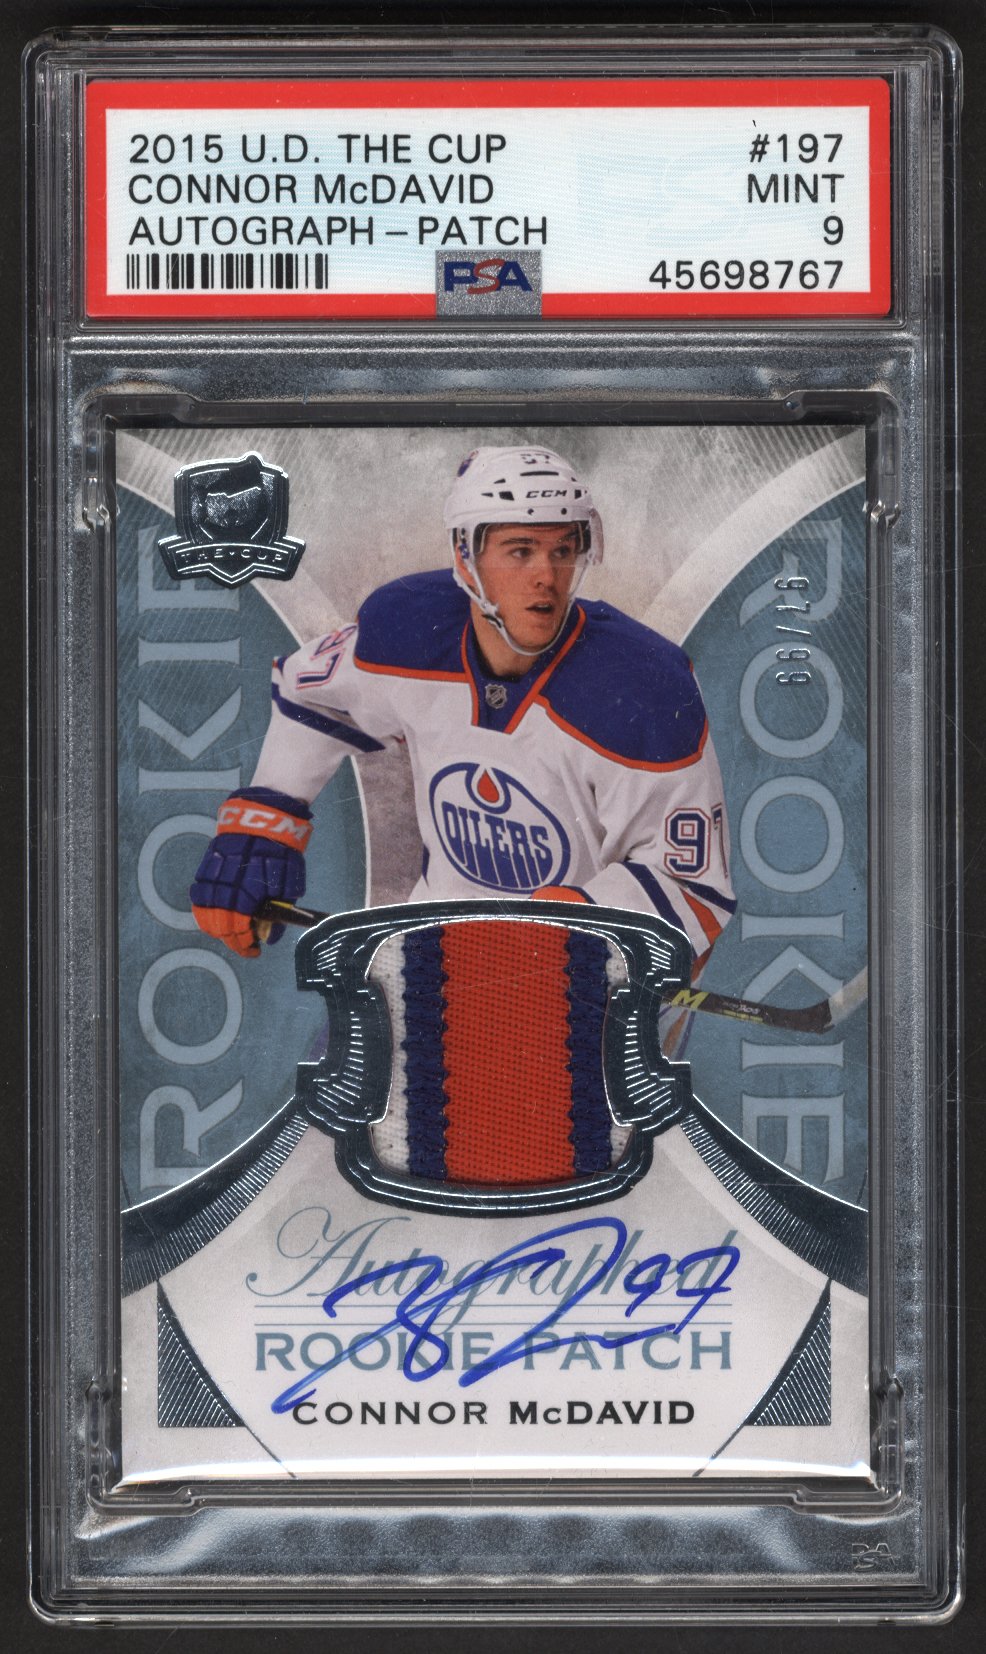 hockey jersey cards for sale